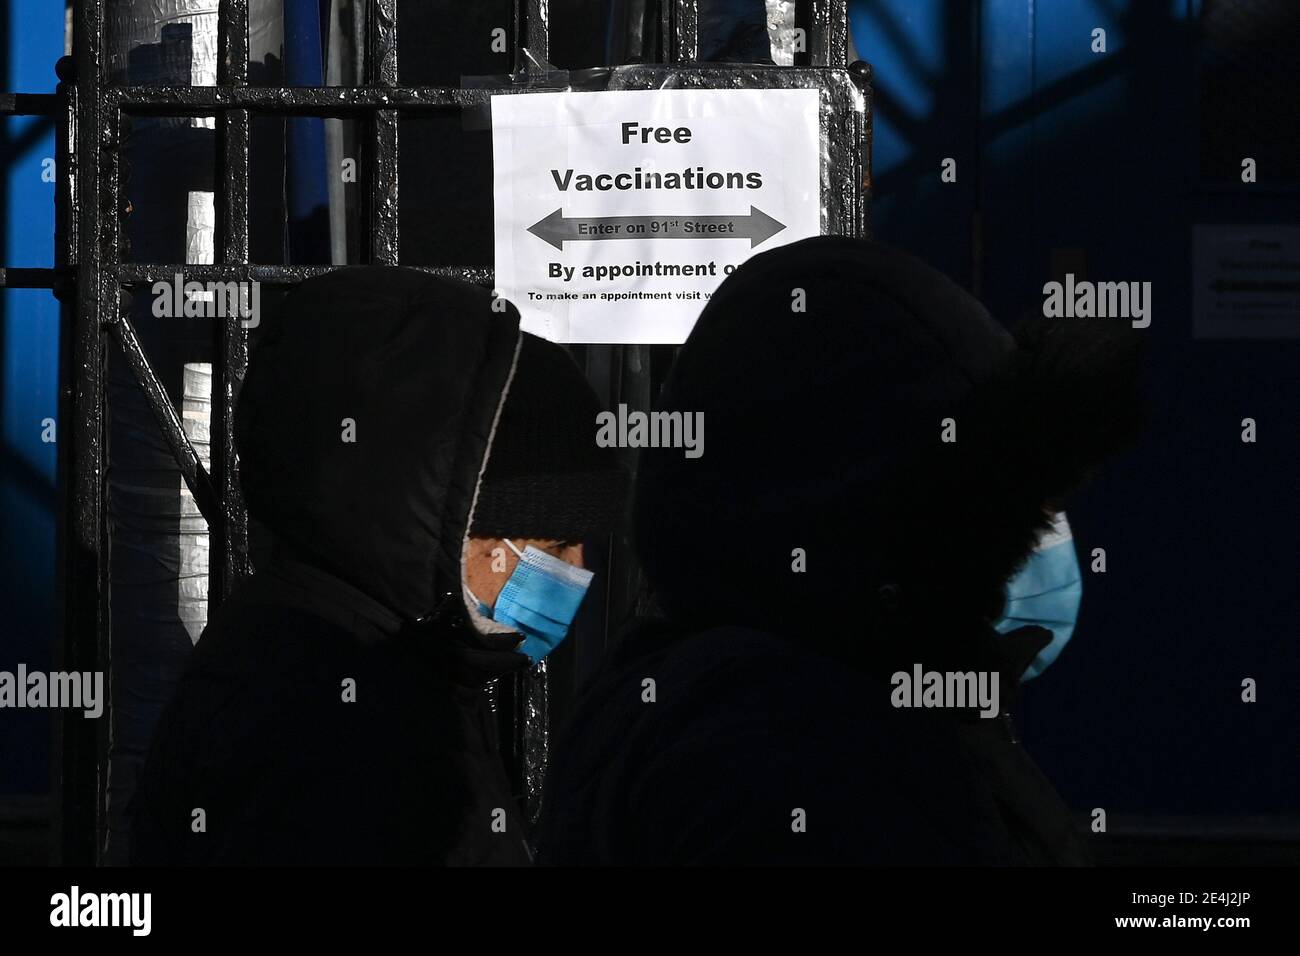 Two people wearing masks walk past a COVID-19 Vaccination Hub in the Elmhurst section of the Queens borough of New York City, NY, January 23, 2021. New York City has ordered 15 if its COVID-19 Vaccinations hubs closed and appointments cancelled due to a shortage of the COVID-19 vaccine; the United States recently surpassed 400,000 deaths due to Coronavirus infections.  (Photo by Anthony Behar/Sipa USA) Stock Photo